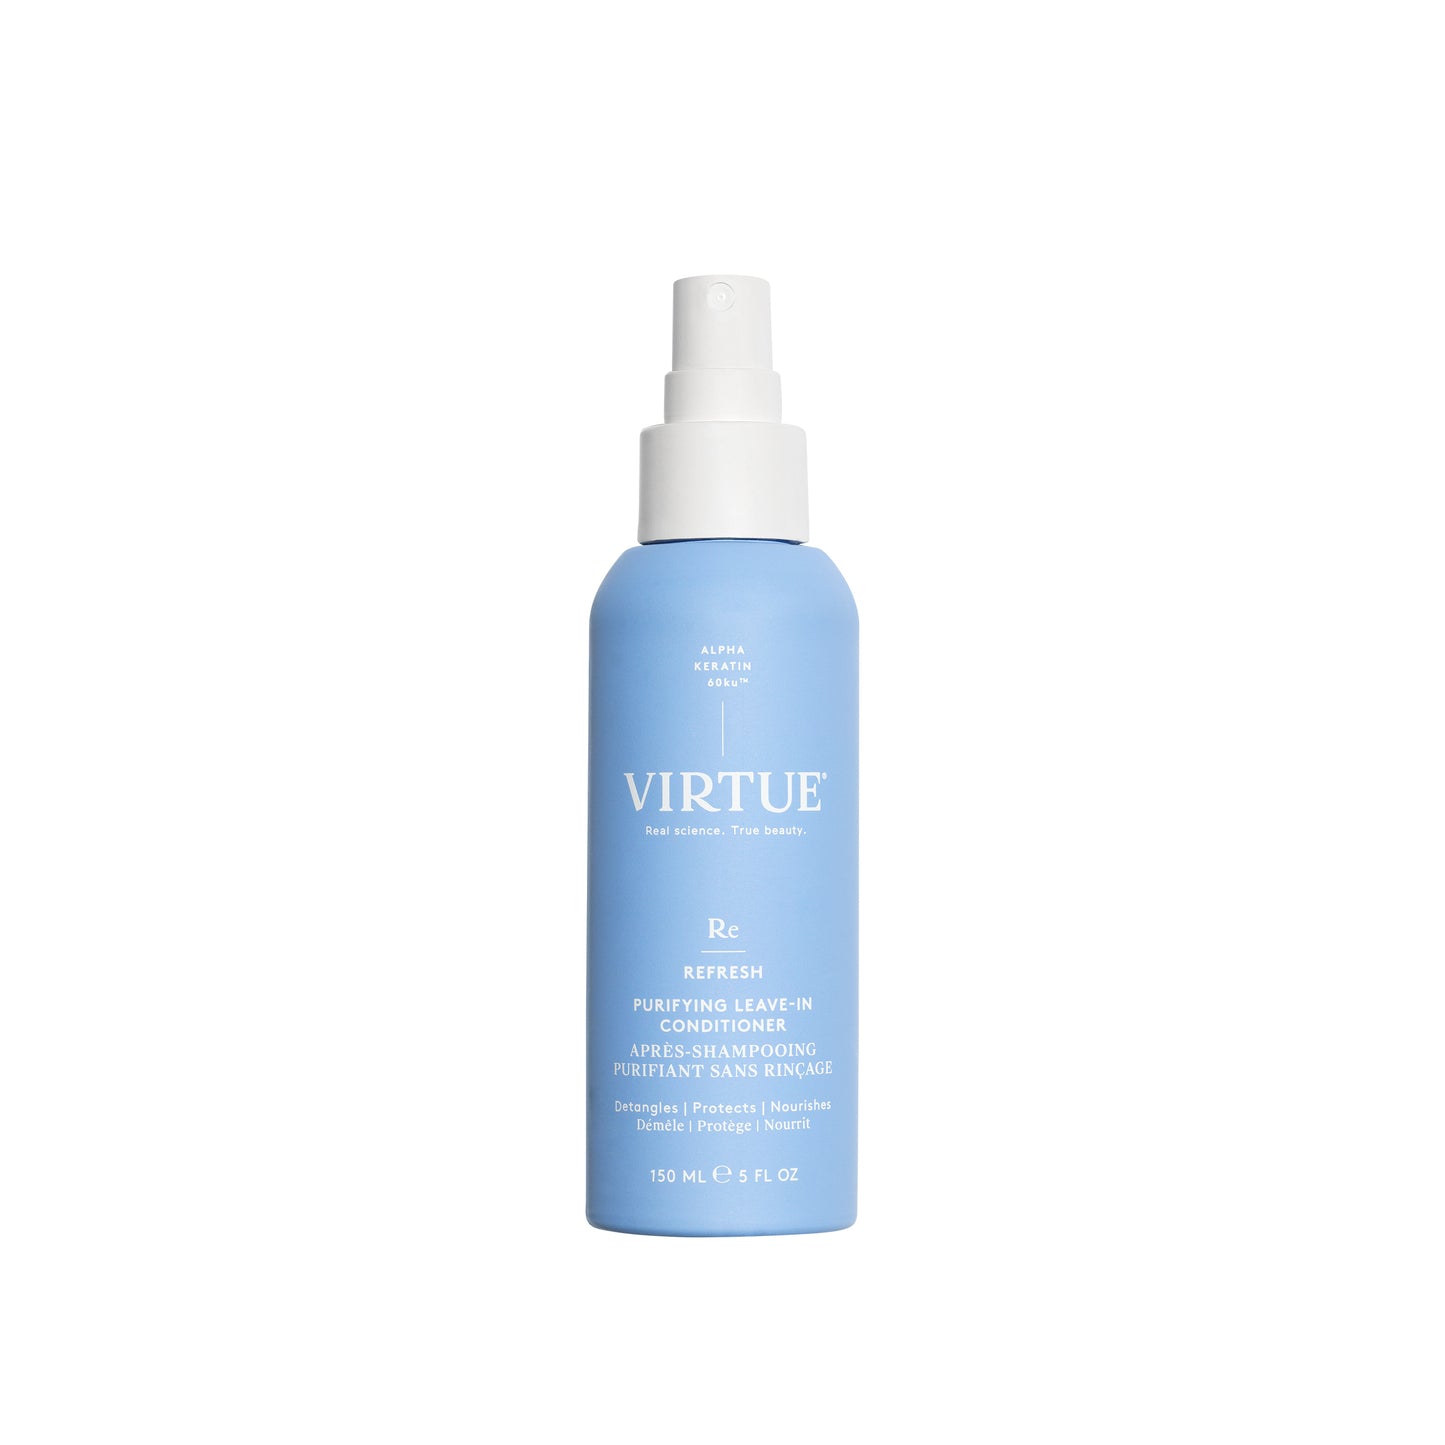 PURIFYING LEAVE-IN CONDITIONER Detangles | Protects | Nourishes